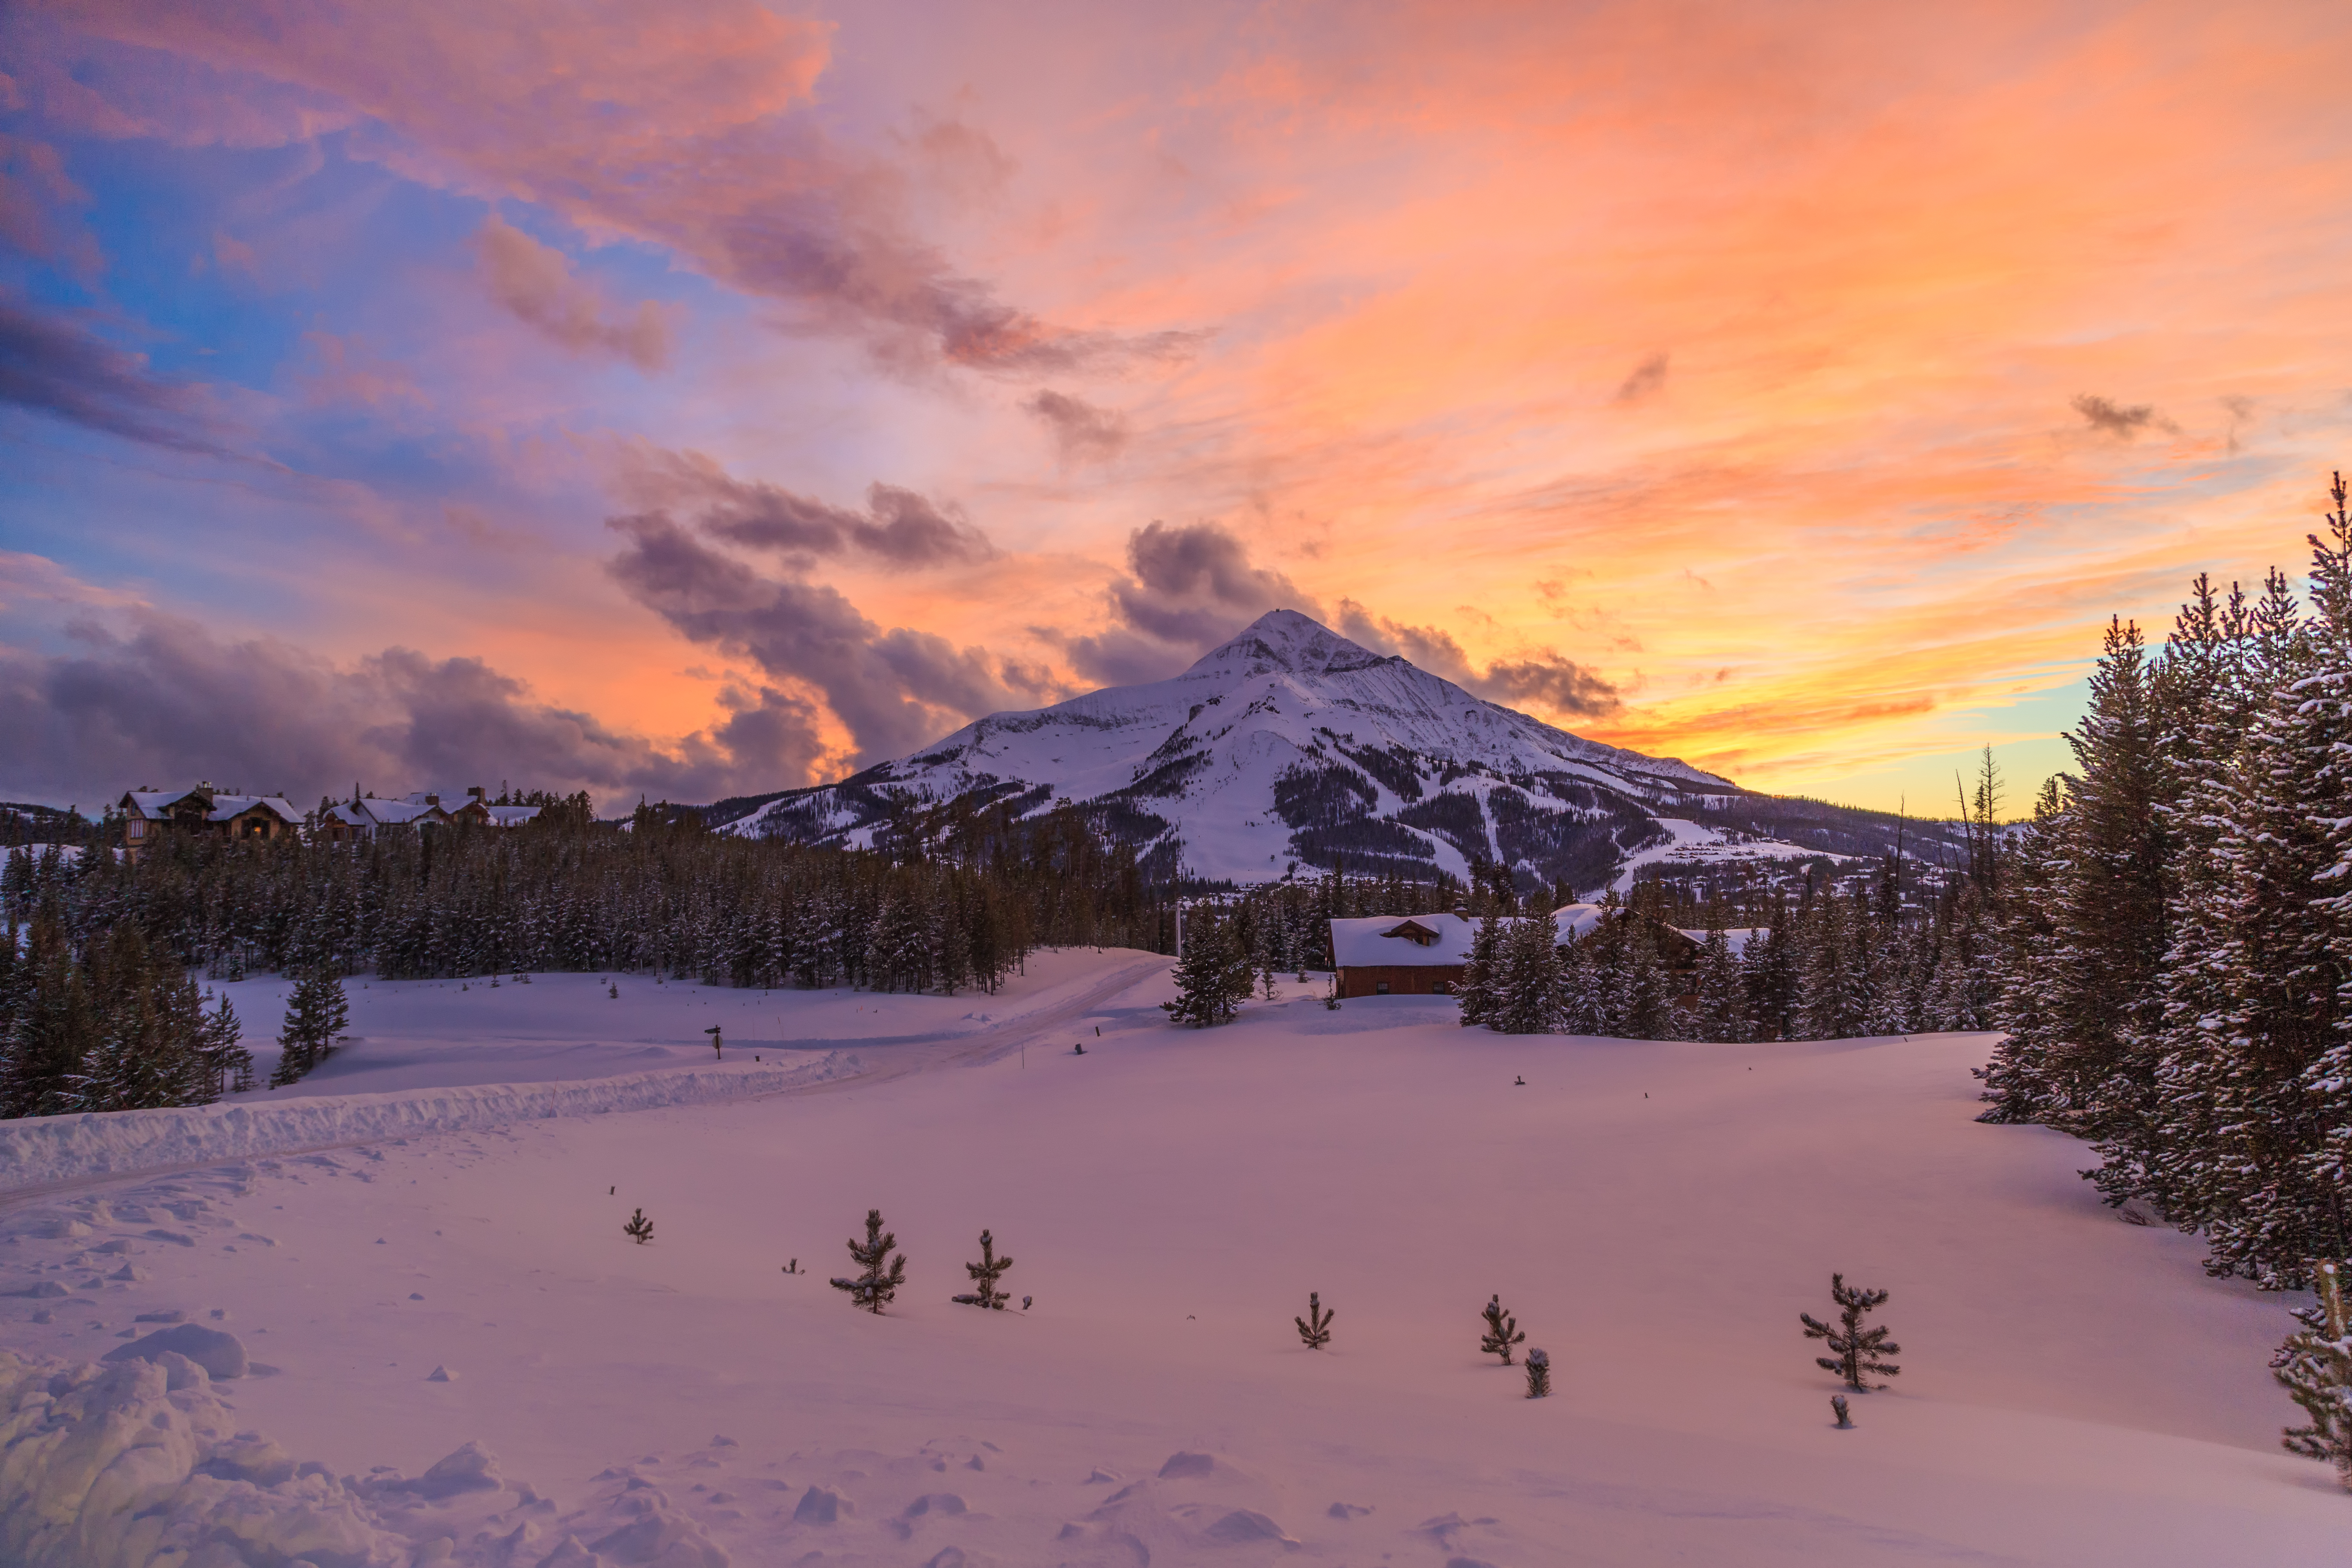 71820 download wallpaper winter, nature, sunset, snow, mountain, montana screensavers and pictures for free